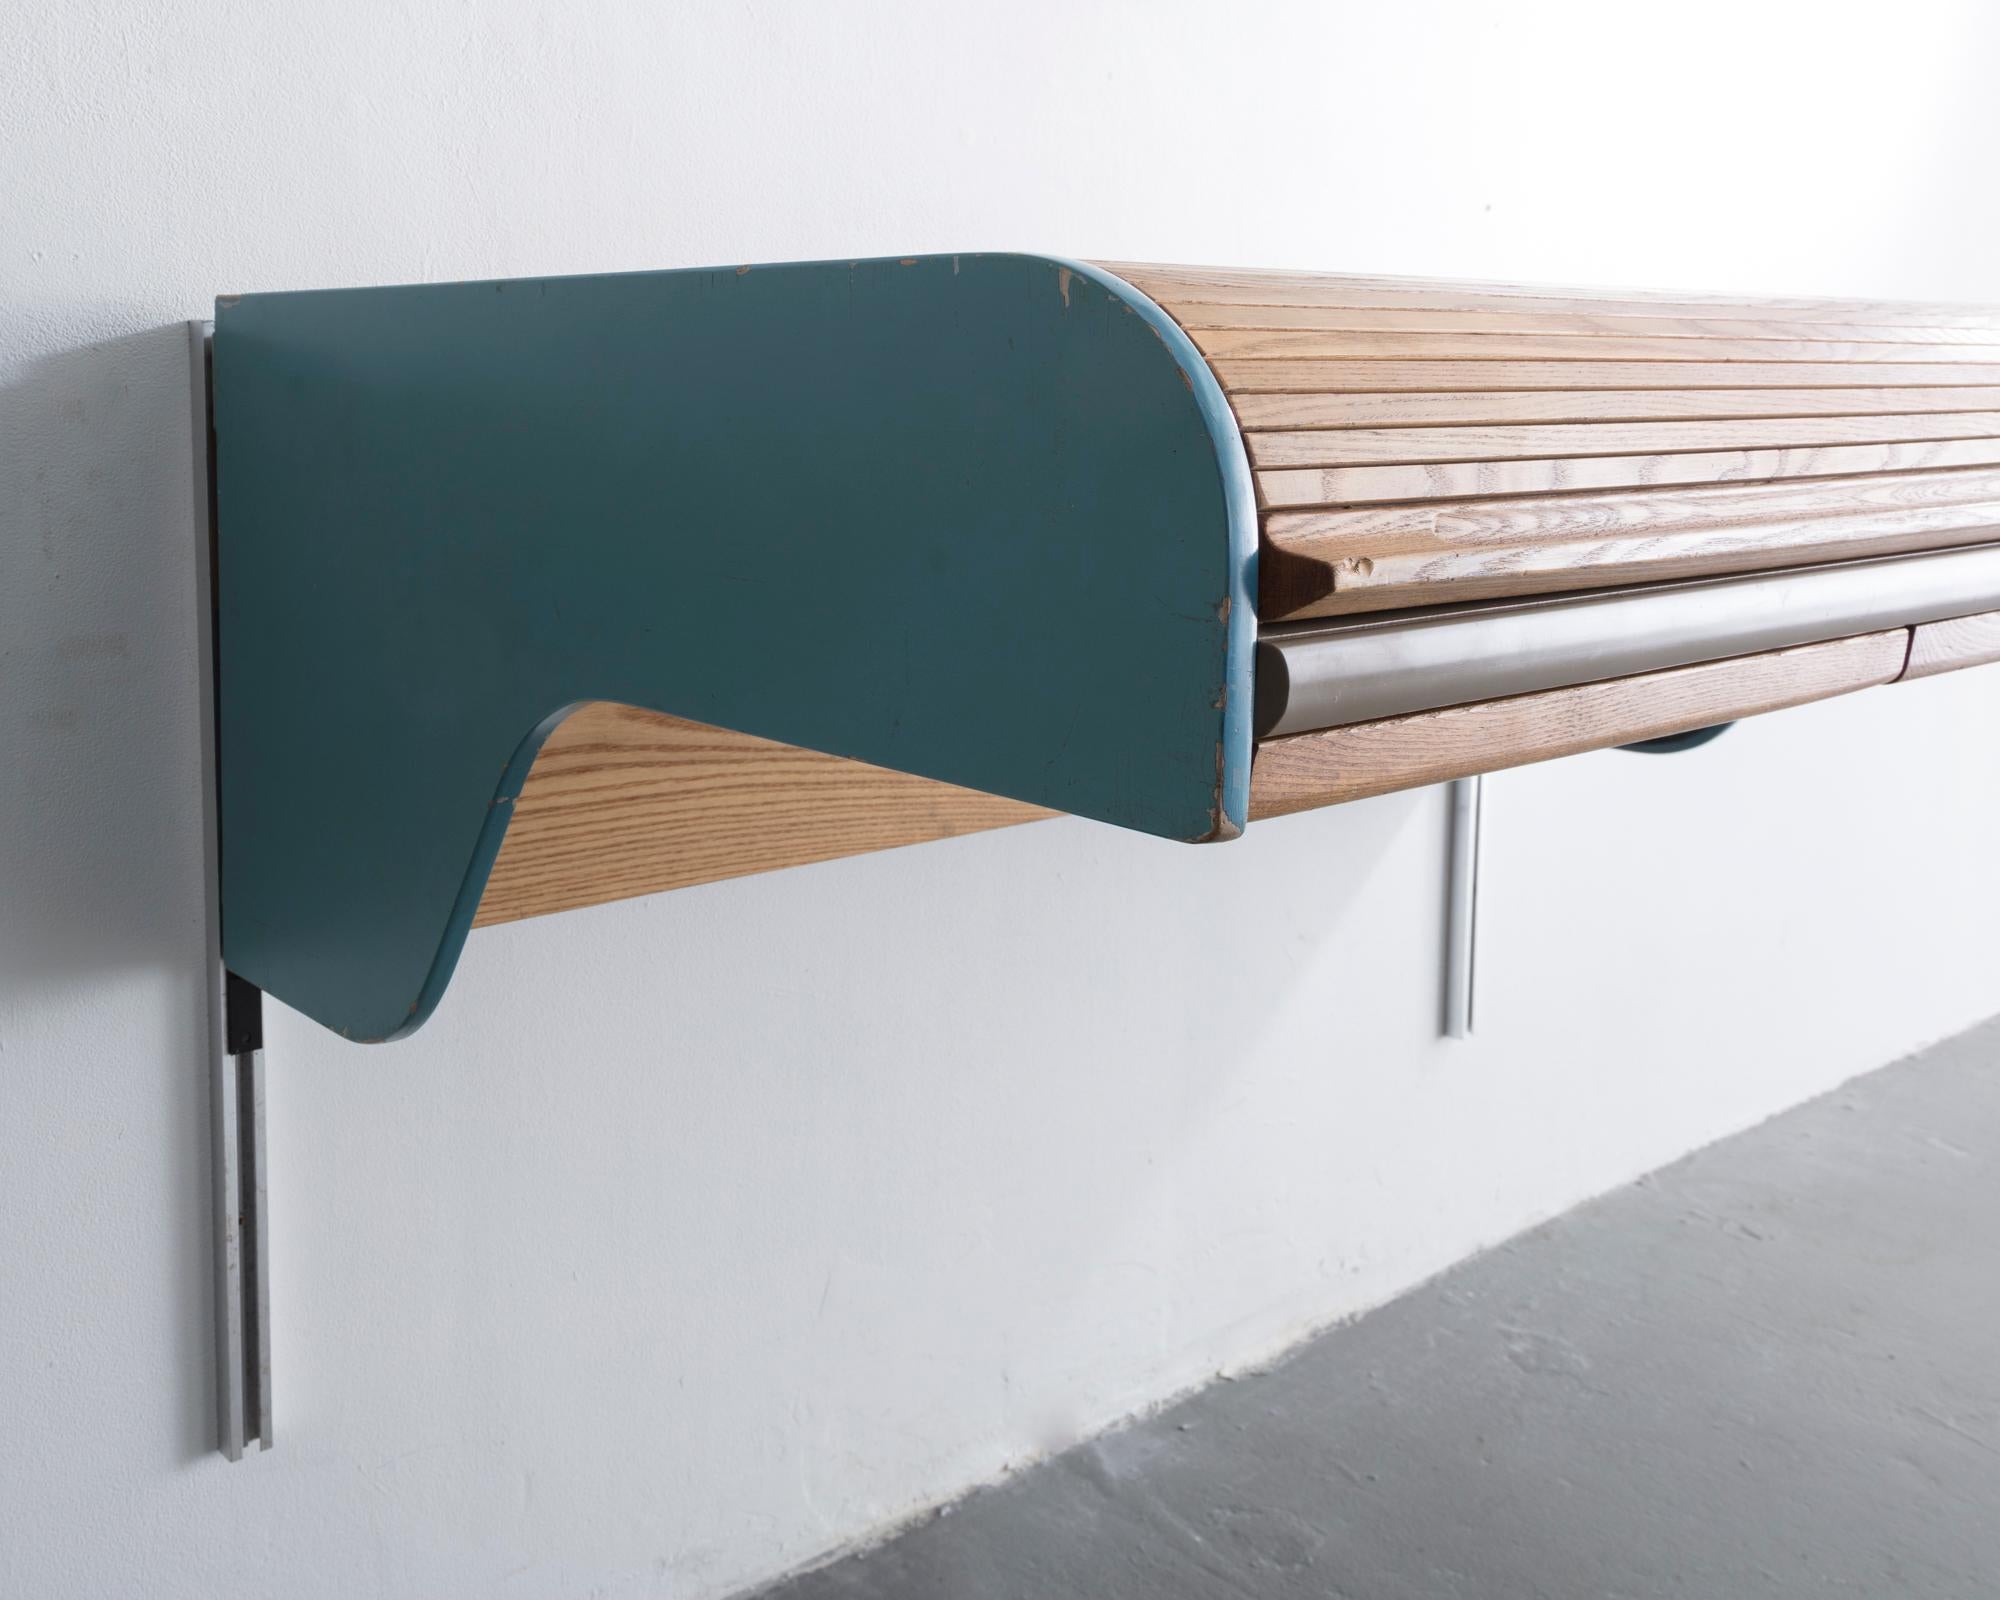 Mid-20th Century Wall-Mounted Hanging Desk Manufactured by Herman Miller, circa 1940